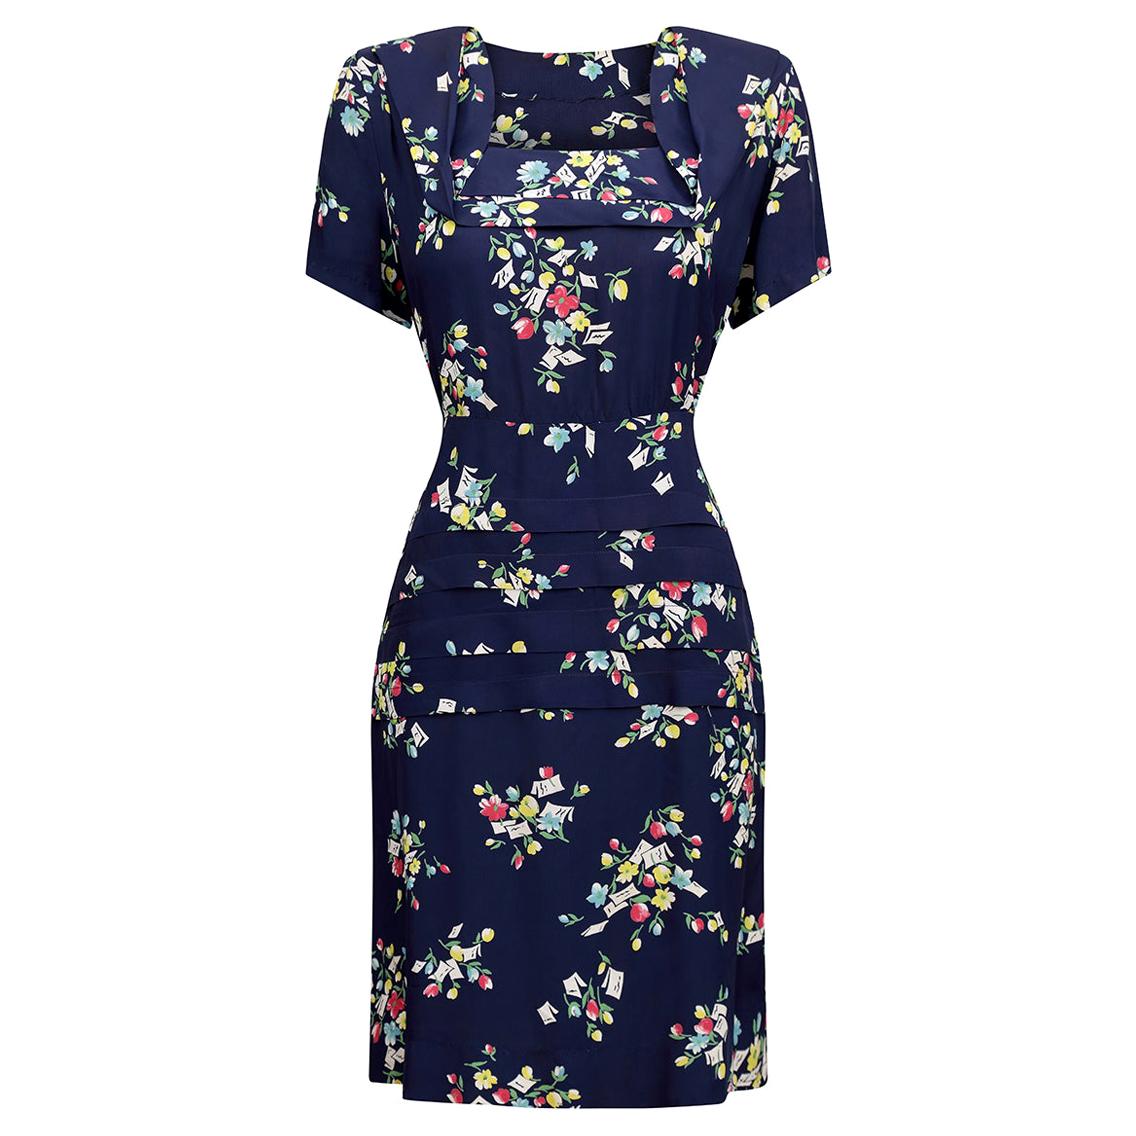 1940s Navy Blue Rayon Dress With Floral Novelty Print 